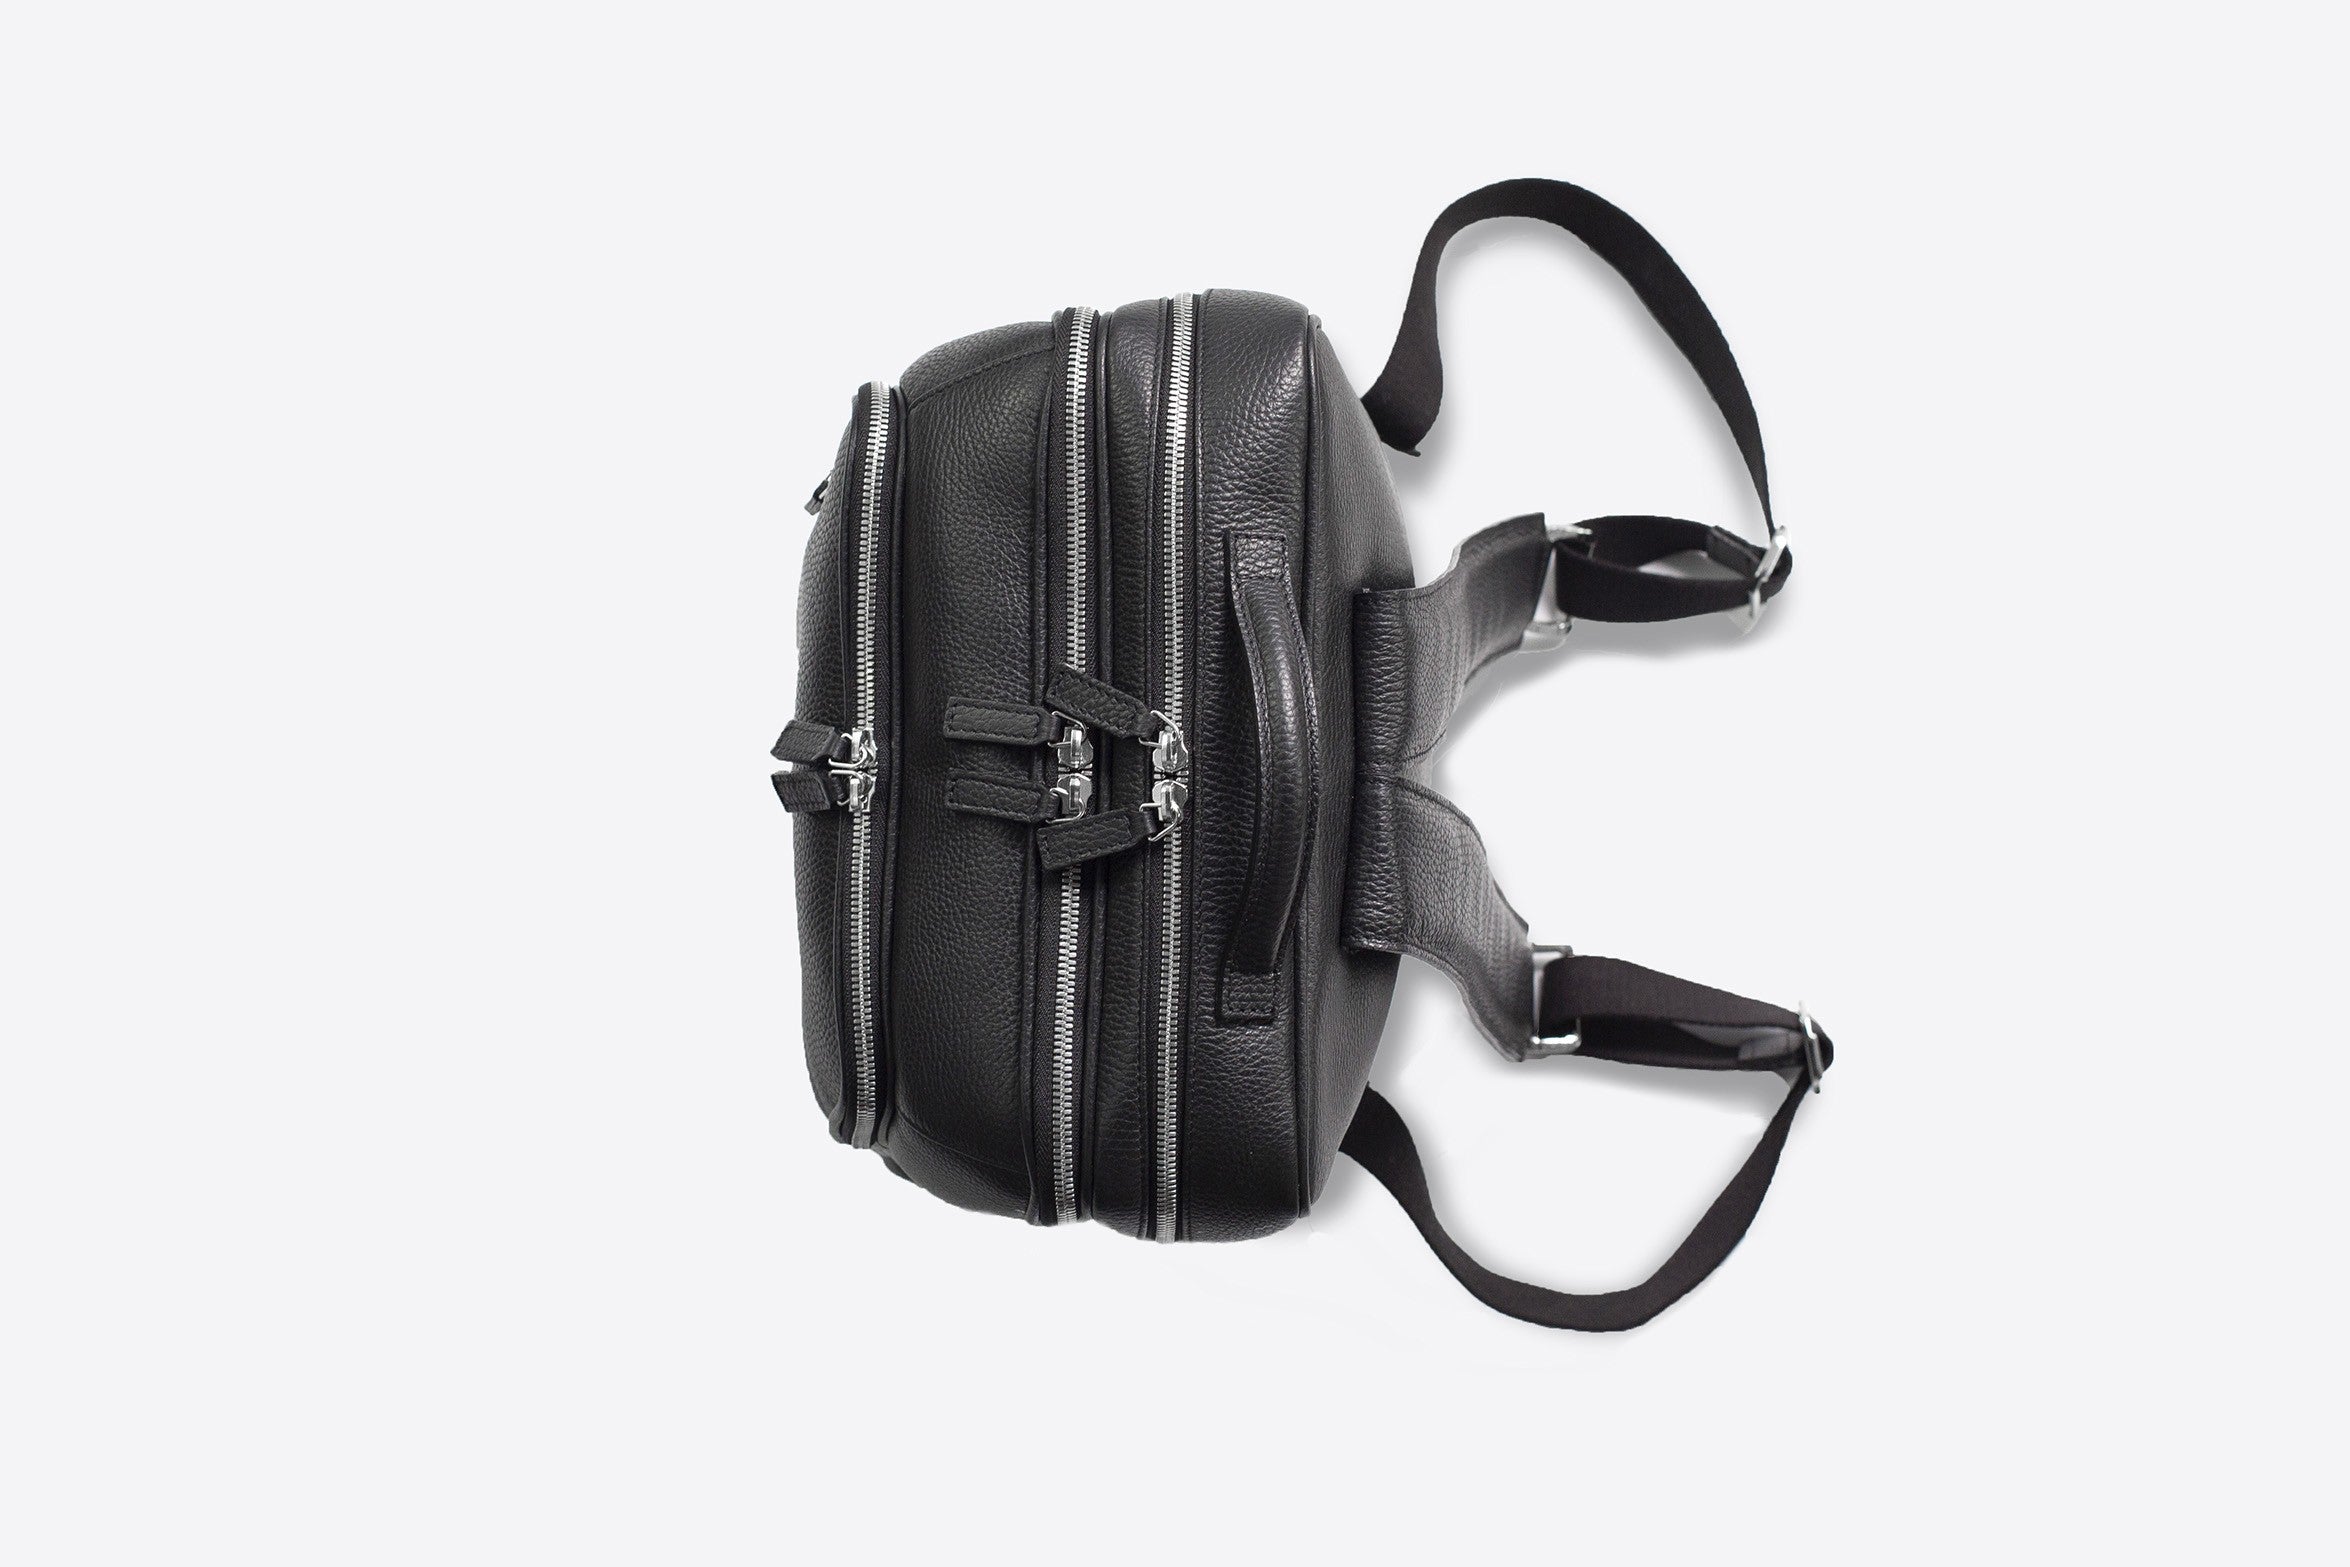 Leather backpack - zaino in pelle - Business